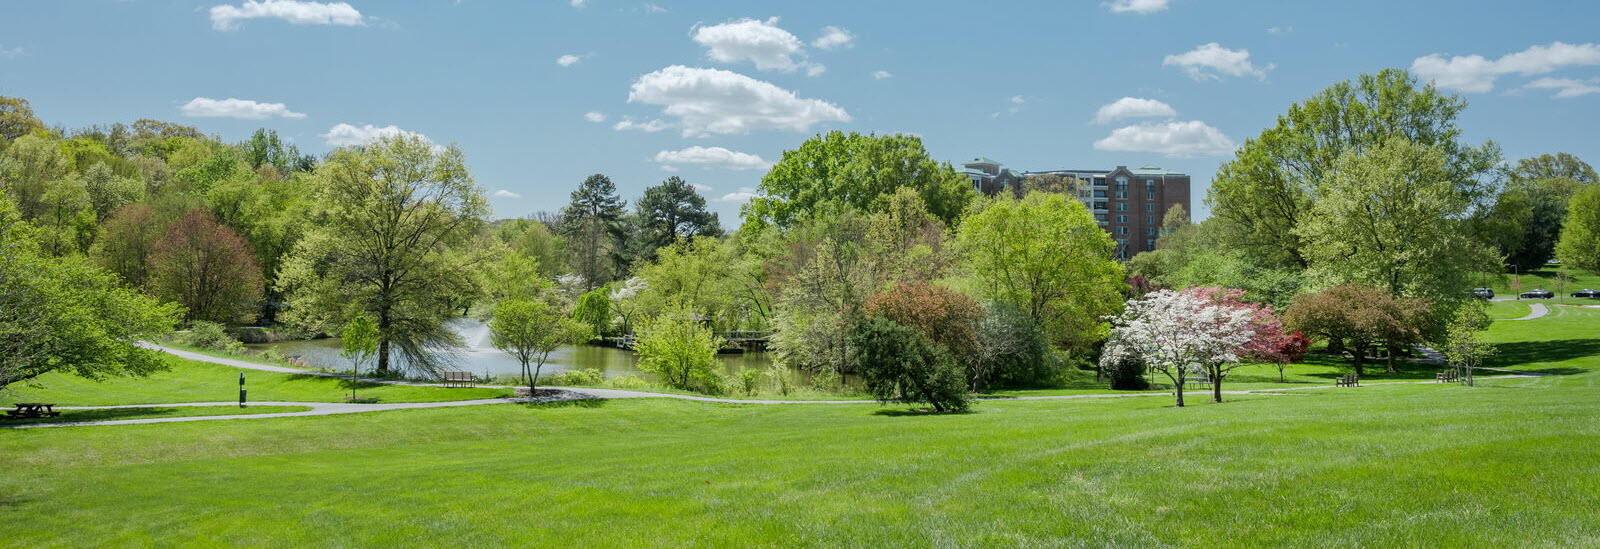 large green lawn leads into Asbury nature preserve with walking paths and large pond